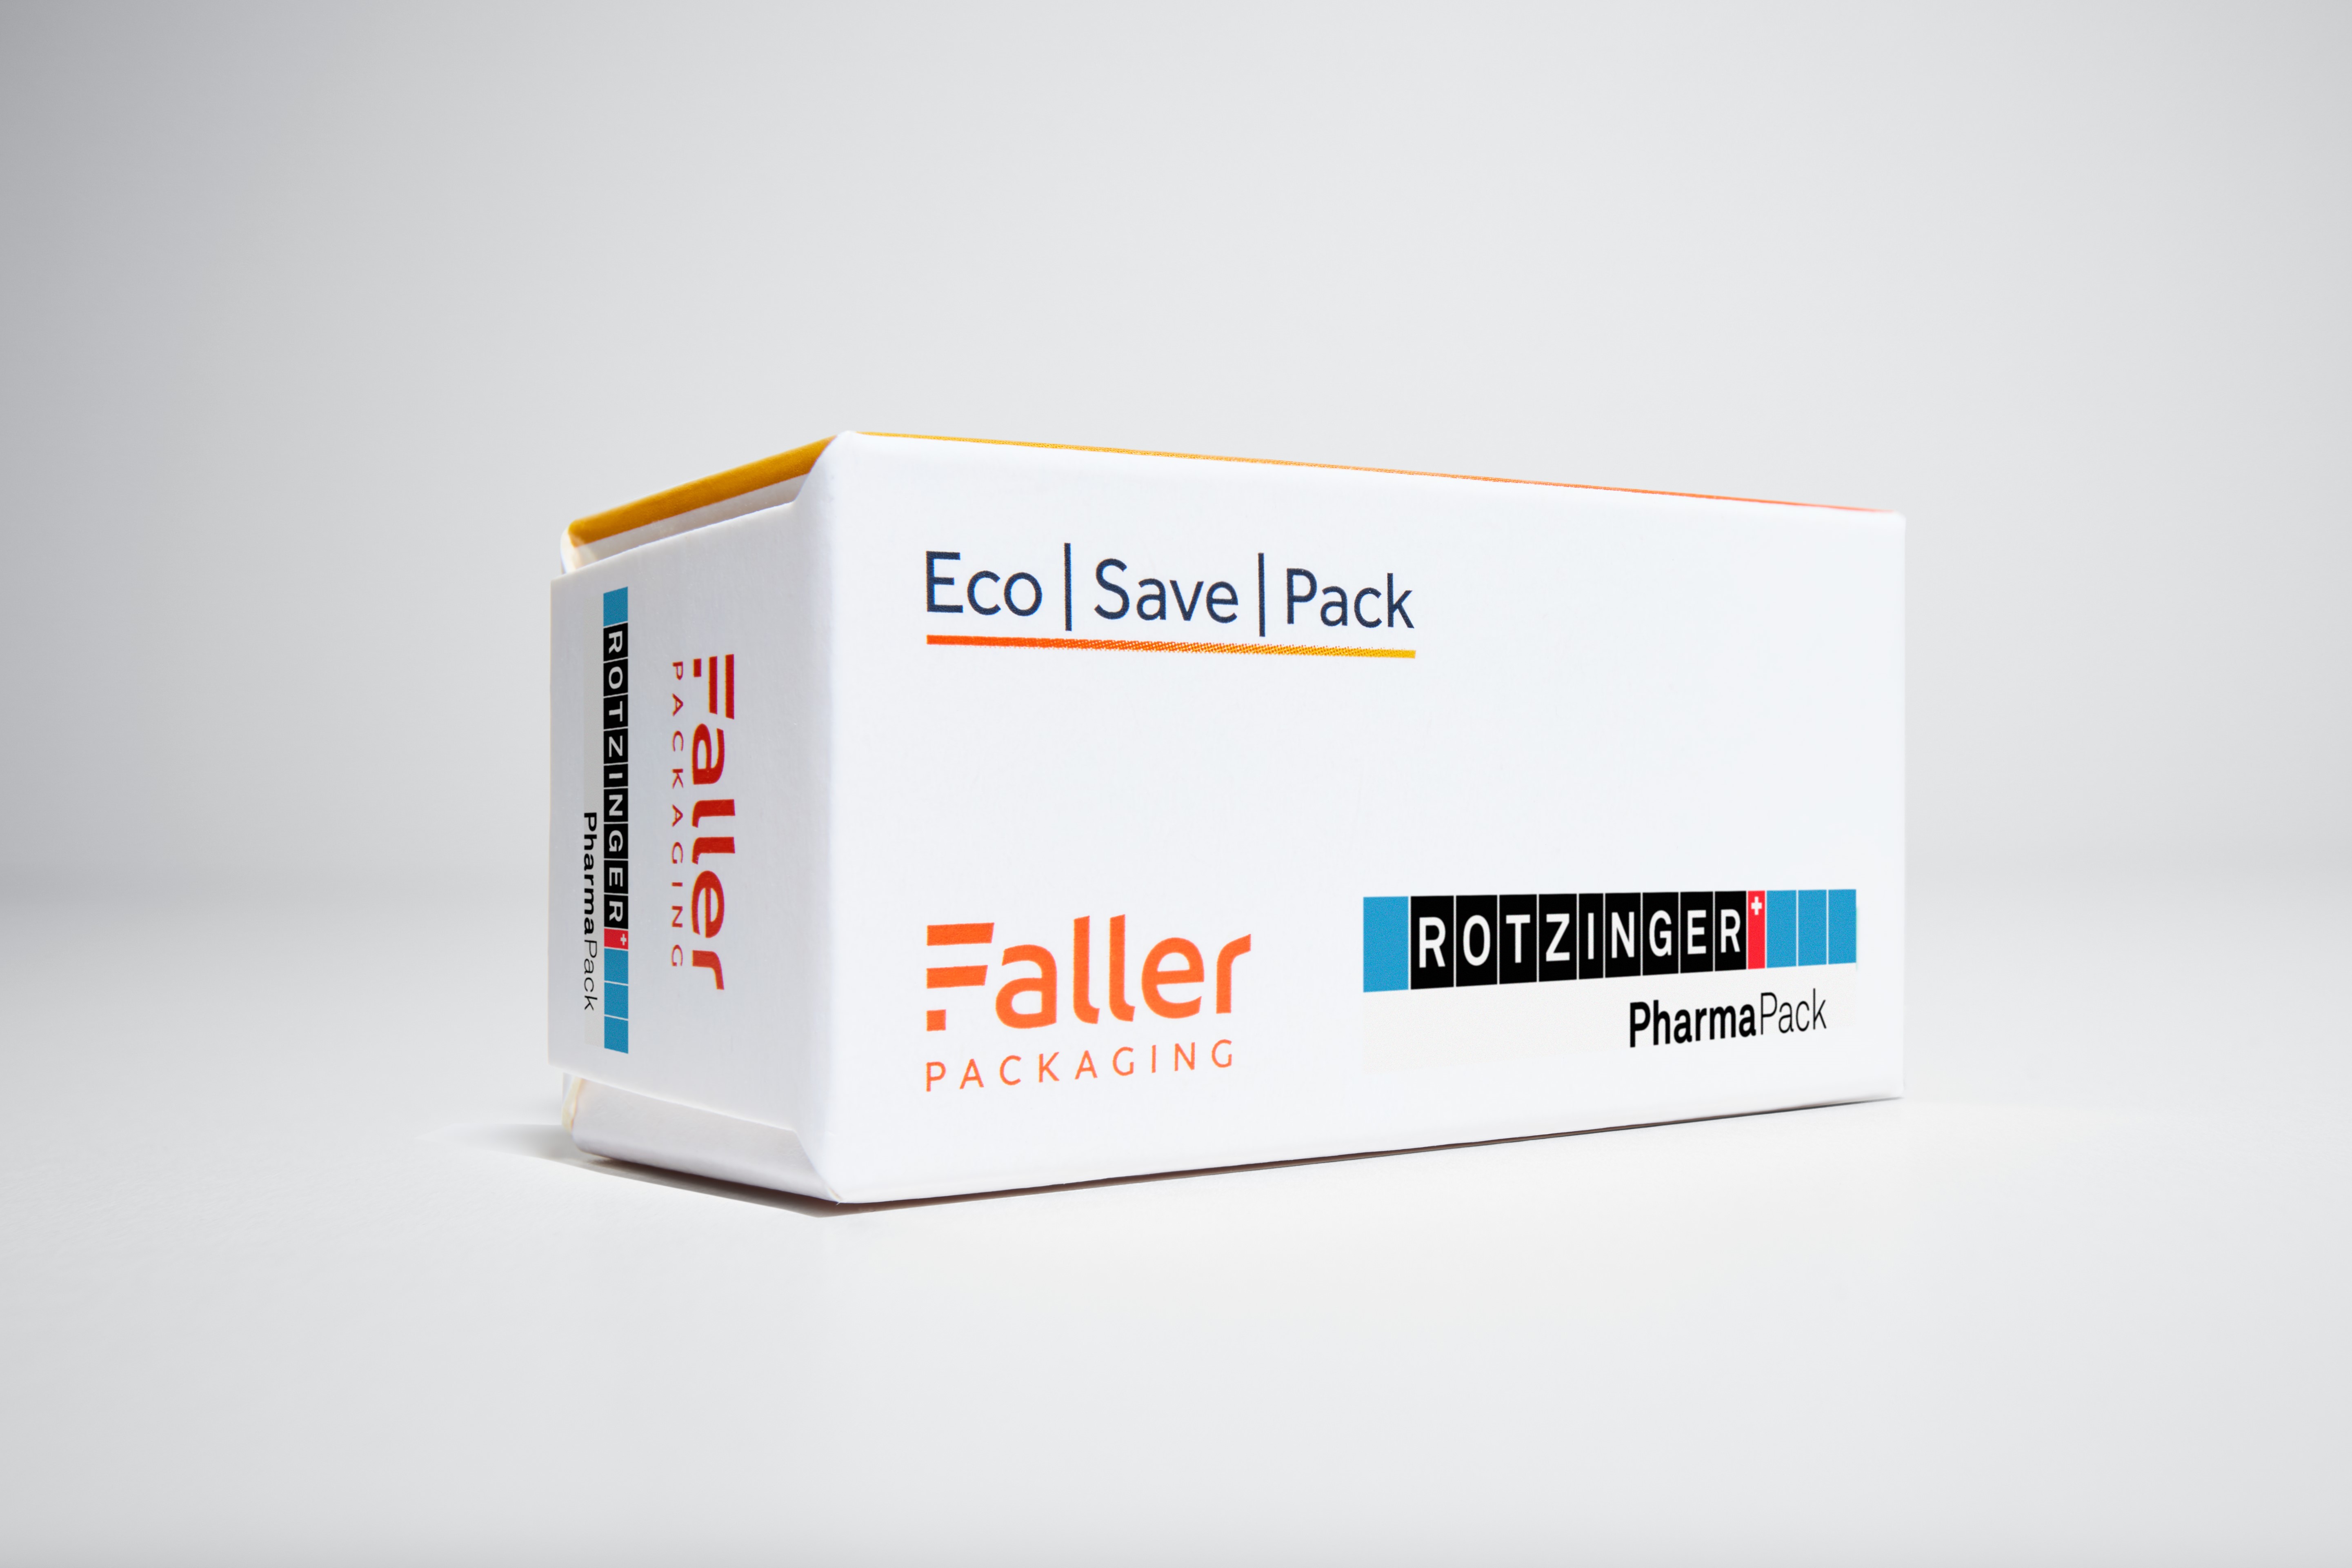 Eco Save Pack by Rotzinger PharmaPack and Faller Packaging